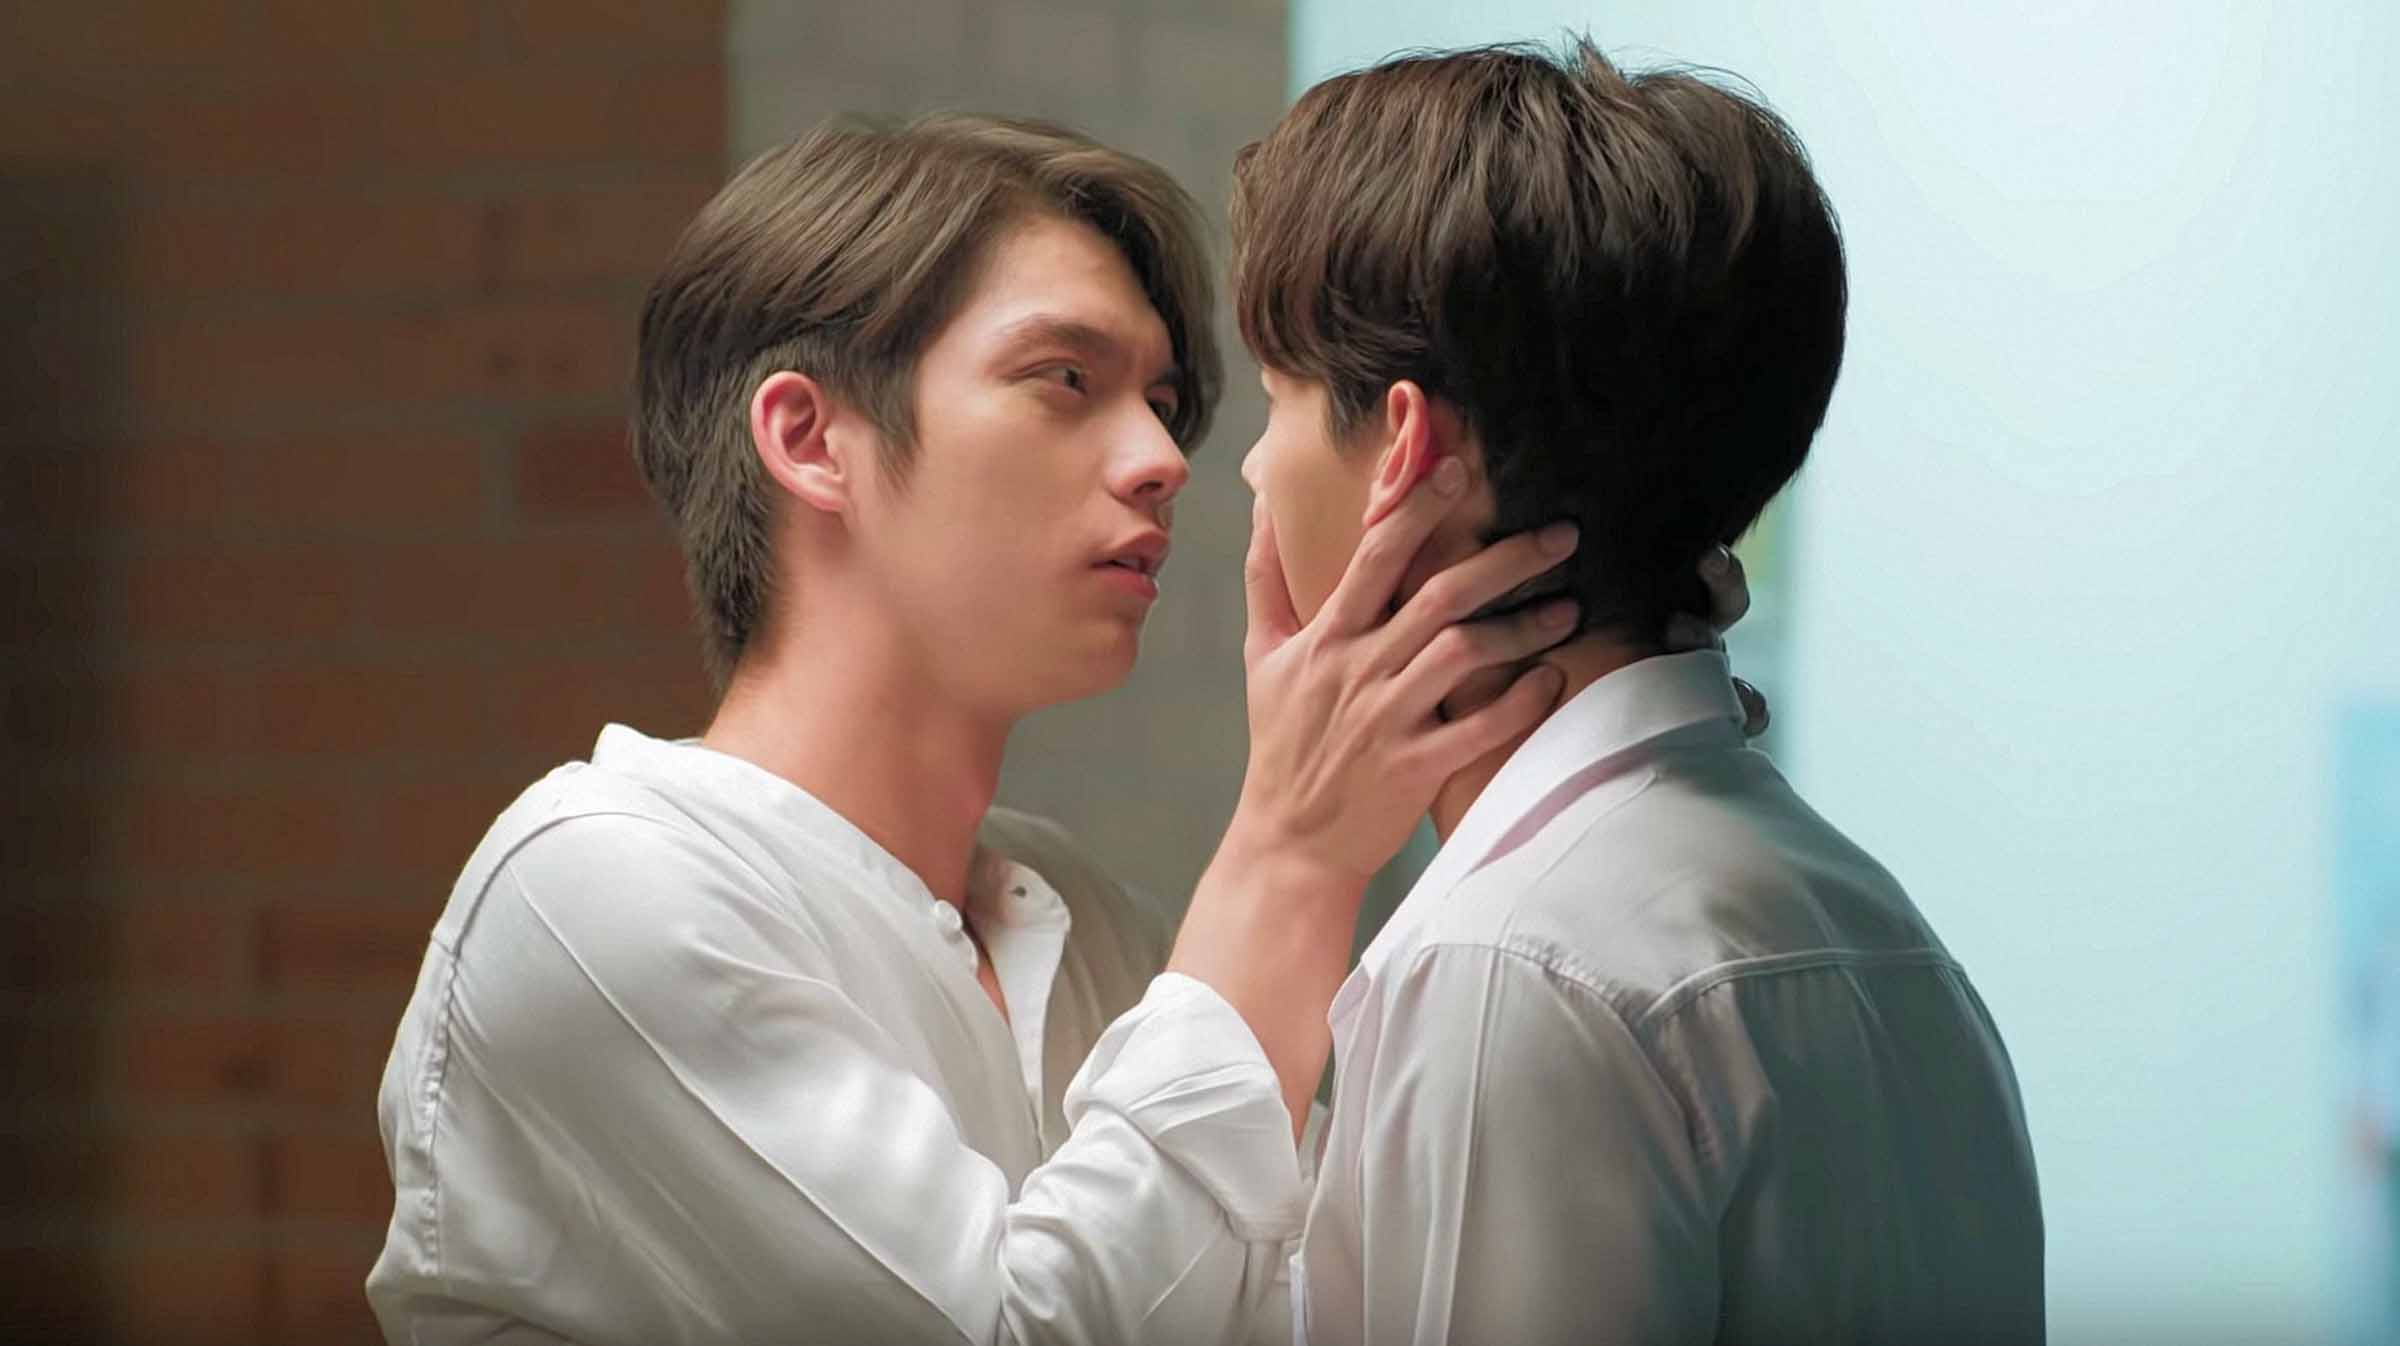 A beginners guide to the Thai boy love show '2gether: The Series'